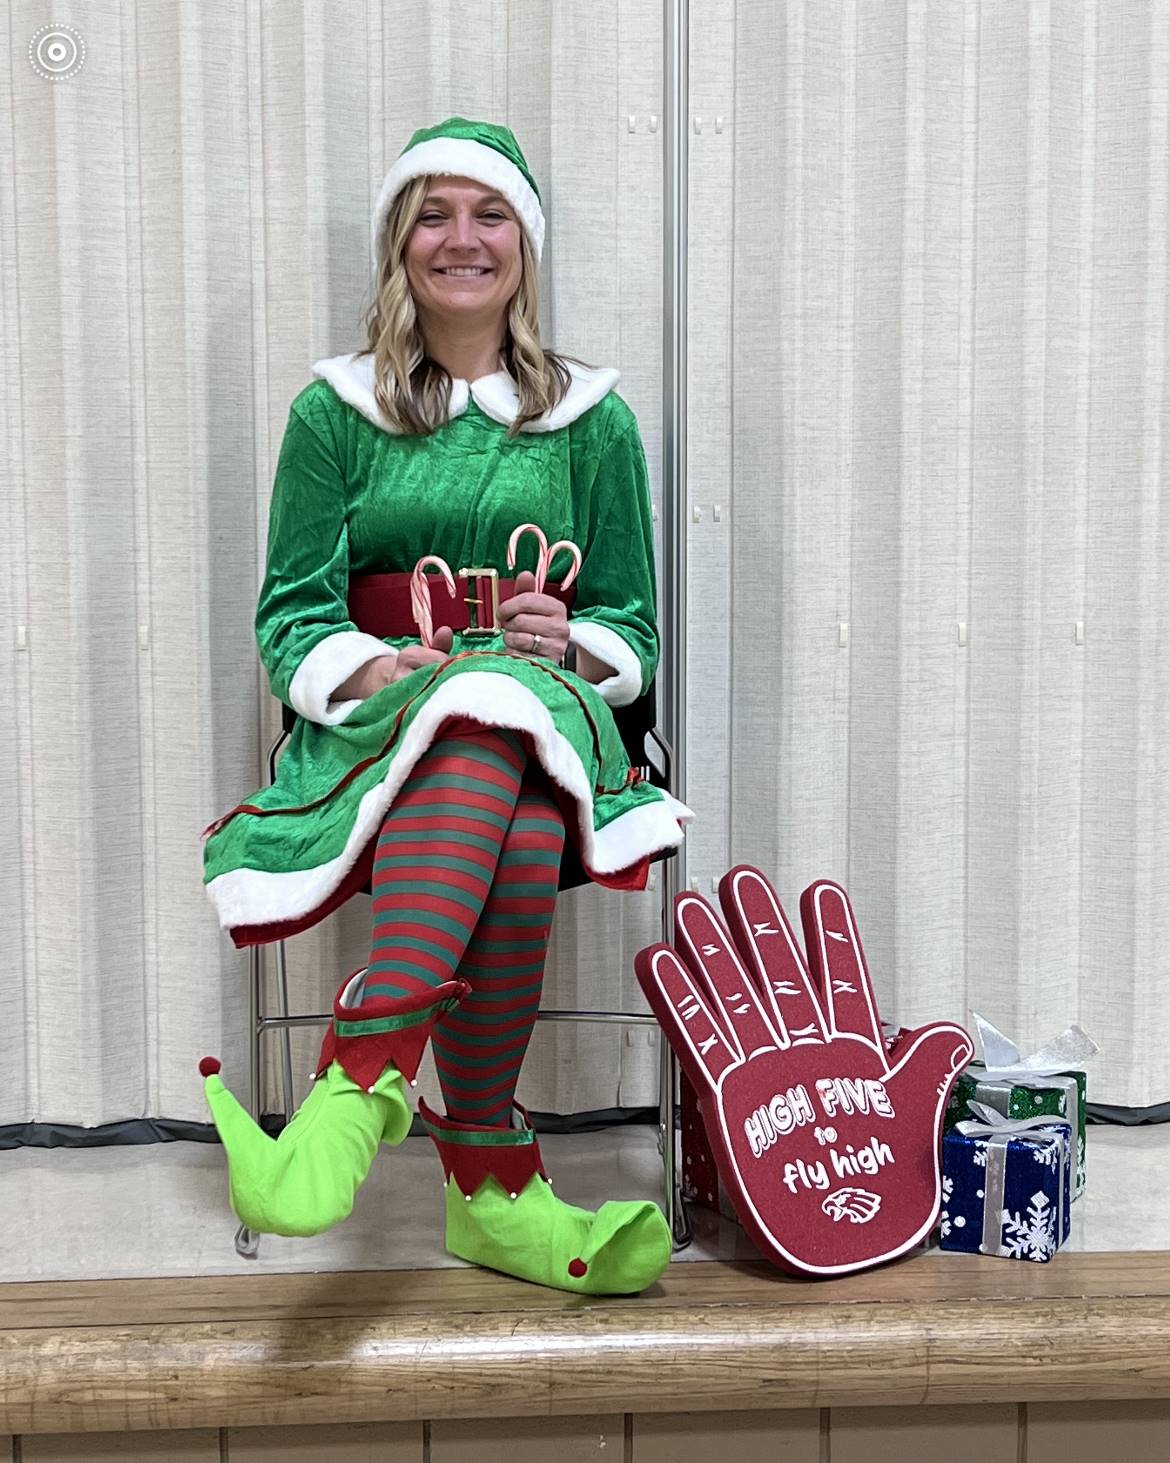 Mrs. Heban, dressed in the elf costume, sits on the stage and greets students as they eat breakfast.